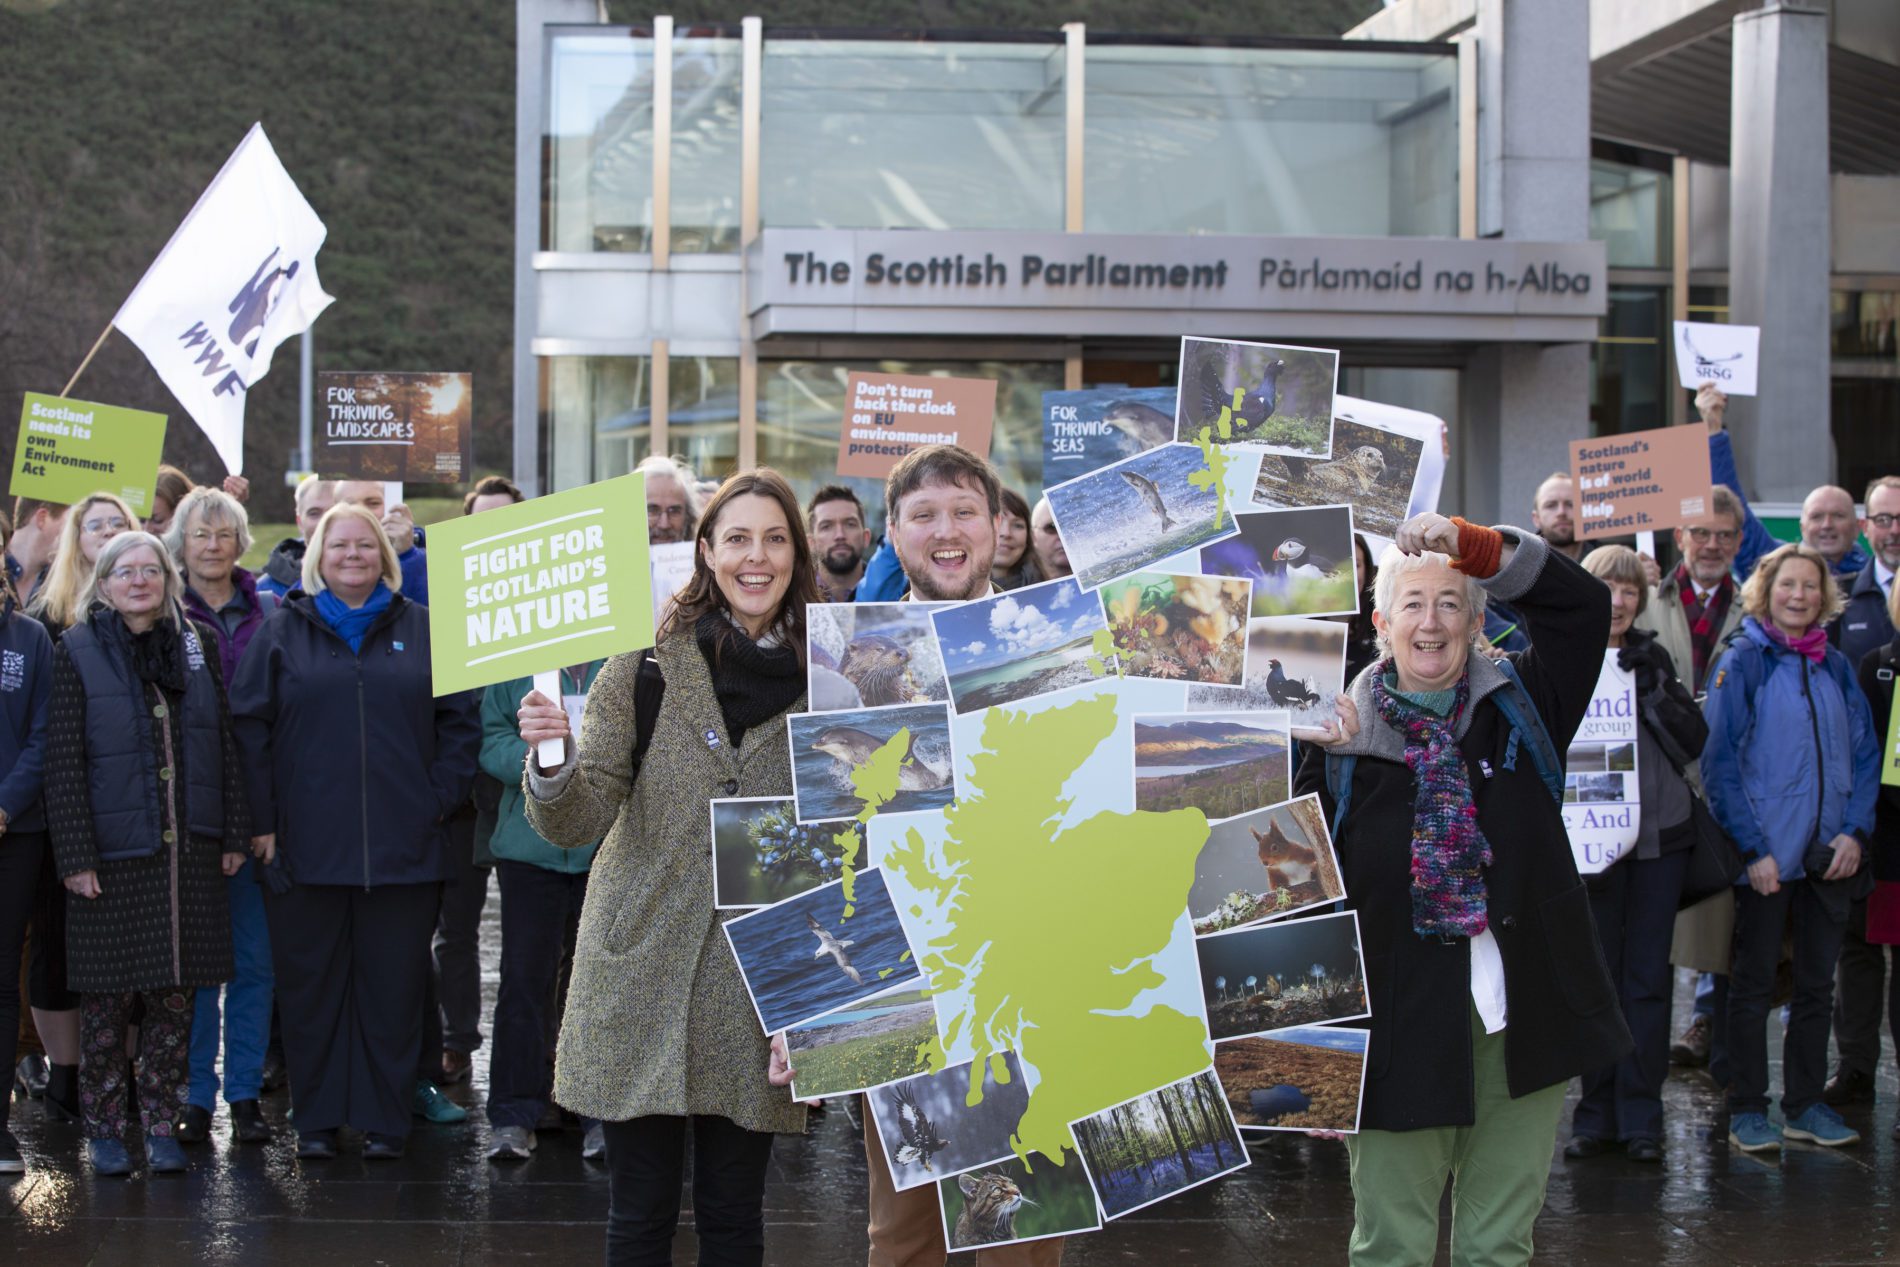 Scottish Environmental Charities Launch Urgent Bid for an Environment Act for Scotland  Pictured Scottish Environment LINK members call for an urgent Environment Act for Scotland at The Scottish Parliament today.     Scottish Environment LINK, a coalition of Scotland’s leading environmental charities will today launch an urgent campaign, “Fight for Scotland’s Nature” at the Scottish Parliament. Together they will call for Scotland to have its own environment act.   Fears sparked by Brexit as well as mounting evidence of the global ecological crisis also heavily impacting Scotland has prompted the charities to join forces and urge the Scottish Government to commit to a dedicated Environment Act for Scotland that protects and enhances Scotland’s nature, now and in the future.   80% of all Scotland’s environmental laws come from the EU. The combination of strong legislation and support for effective implementation has made these laws among the most effective on Earth. Further, Scotland’s nature has been a net beneficiary of the EU’s LIFE Nature fund which alone has supported conservation projects worth well over 25 million Euros to date.     If and when Brexit happens, Scotland (along with the rest of the UK) will lose the unrivalled support and enforcement roles of the European Commission, European Court of Justice and other EU bodies. Alarmingly, with only a few months to go, there is uncertainty about what will replace this.   This is why Scottish Environment LINK is pushing the Scottish Government to fight for Scotland’s nature and commit to a world class environment act before it’s too late. Ahead of global 2020 targets on halting biodiversity loss, it is important that Scotland sends a clear message to the world that our environmental protections are not up for grab.   Joined up legislation in the form of a Scottish Environment Act, that is fit for purpose and caters to Scotland’s unique environmental needs is required for this to be meaningful.   Scotland may be small but its natural environment is of world importance. It has 60% of the UK’s seas and 10% of Europe’s coastline. It is home to a staggering one third of all of Europe’s breeding seabirds and 29% of Europe’s seals. Its coral reefs, thought to be around 4,000 years old, support an incredible array of life, including fish, sharks and invertebrates.  As for peatlands, Scotland has 5% of the world’s share, which stores 25 times more carbon than all the vegetation of the UK.   Charles Dundas Chair of Scottish Environment LINK said: “Our environment is important not just in terms of its natural and cultural wealth. It is our life support system and we rely on it for food, clean water and air and jobs - 14% of which exist as a result of our nature.   “But this is all under threat. Every day brings new evidence of the global ecological crisis that is underway.  Even here in Scotland, with 1 in 11 species currently at risk of extinction, the effects of climate change and ecosystem collapse are apparent. The legal framework of protections and associated funding that we currently receive from the EU have been pivotal in holding back the tide of further biodiversity declines.”   Scottish Environment LINK is stressing the importance of Scotland continuing to develop protections in line with internationally recognised EU environmental principles that have been crucial in safeguarding Scotland’s nature and enabling it to thrive. It also warns of the dangers of inadequate support and funding to effectively implement laws. Further, it is pushing for clear environmental targets supported by long-term actions and funding to mitigate climate change, create robust ecosystems and ensure sustainable use of our natural resources that is good for us and our land and seas.   Joyce McMillan, President of Scottish Environment LINK said: “As guardians of our amazing environment, we have a duty to ensure future environmental legislation is not tokenistic. It must be upheld through an independent and well-resourced watchdog.   “Now more than ever, we need a Scottish Environment Act that builds on existing Scottish Government commitments to retain EU protections. This would send a clear message to UK and EU partners as well as the rest of the world that we are serious about protecting and enhancing our natural environment. We live in a time of increasing environmental crisis and degradation, and it is vital that Scotland remains a dynamic part of the movement towards a more sustainable future, both for our own sake, and as a reflection of our commitment to wider international efforts to protect and cherish the natural world on which we all depend.”    Ends   For media enquiries and interview requests please contact: Azra Wyart at: mediaandeventsscotland@gmail.com or call: 07788437819.   Notes to Editors (s)   (1)  Scottish Environment LINK is the forum for Scotland's voluntary environment community, with over 35 member bodies representing a broad spectrum of environmental interests with the common goal of contributing to a more environmentally sustainable society.   LINK is a Scottish Charity (SC000296) and a Scottish Company Limited by guarantee (SC250899). LINK is core funded by Membership Subscriptions and by grants from Scottish Natural Heritage, Scottish Government and Charitable Trusts.   www.scotlink.org www.savescottishseas.org   2) ‘For more information about Scottish Environment LINK’s, Fight for Scotland’s Nature Campaign visit www.fightforscotlandsnature.scot   (3)  Scottish Environment LINK members wrote to the Cabinet Secretary for Environment, Climate Change and Land Reform Roseanna Cunningham to ask her to support a Scottish Environment Act. The letter is available here: www.fightforscotlandsnature.scot.    Photograph by Martin Shields  Tel 07572 457000 www.martinshields.com © Martin Shields